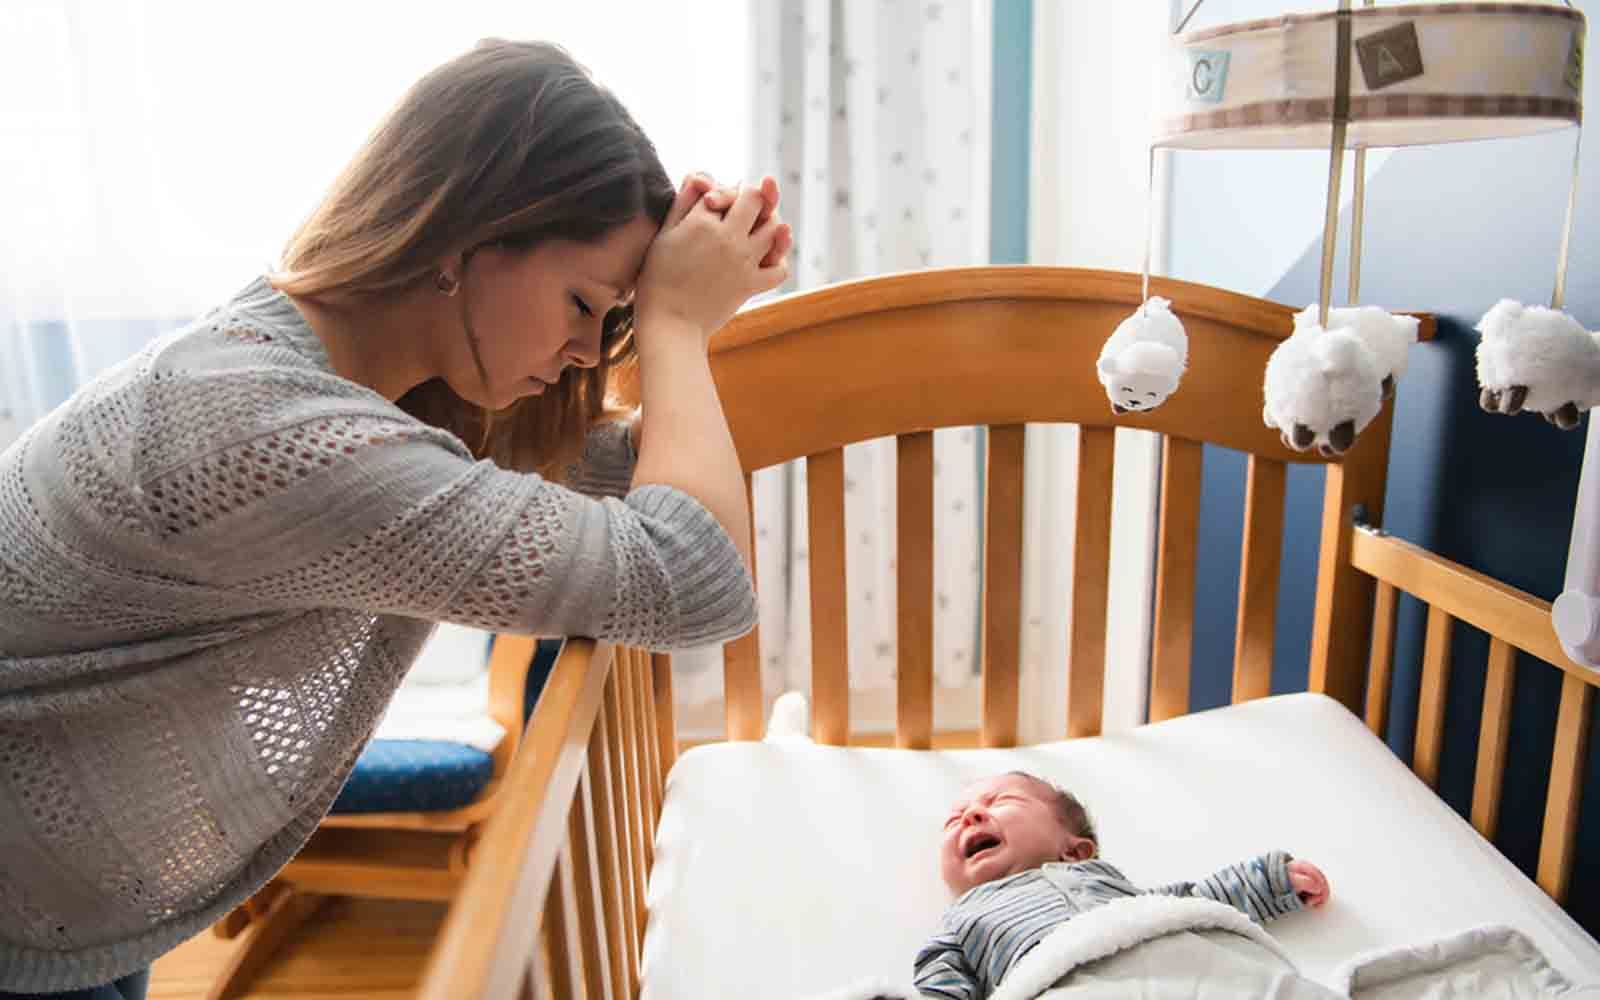 Women’s Health: The Baby Blues and Postnatal Depression